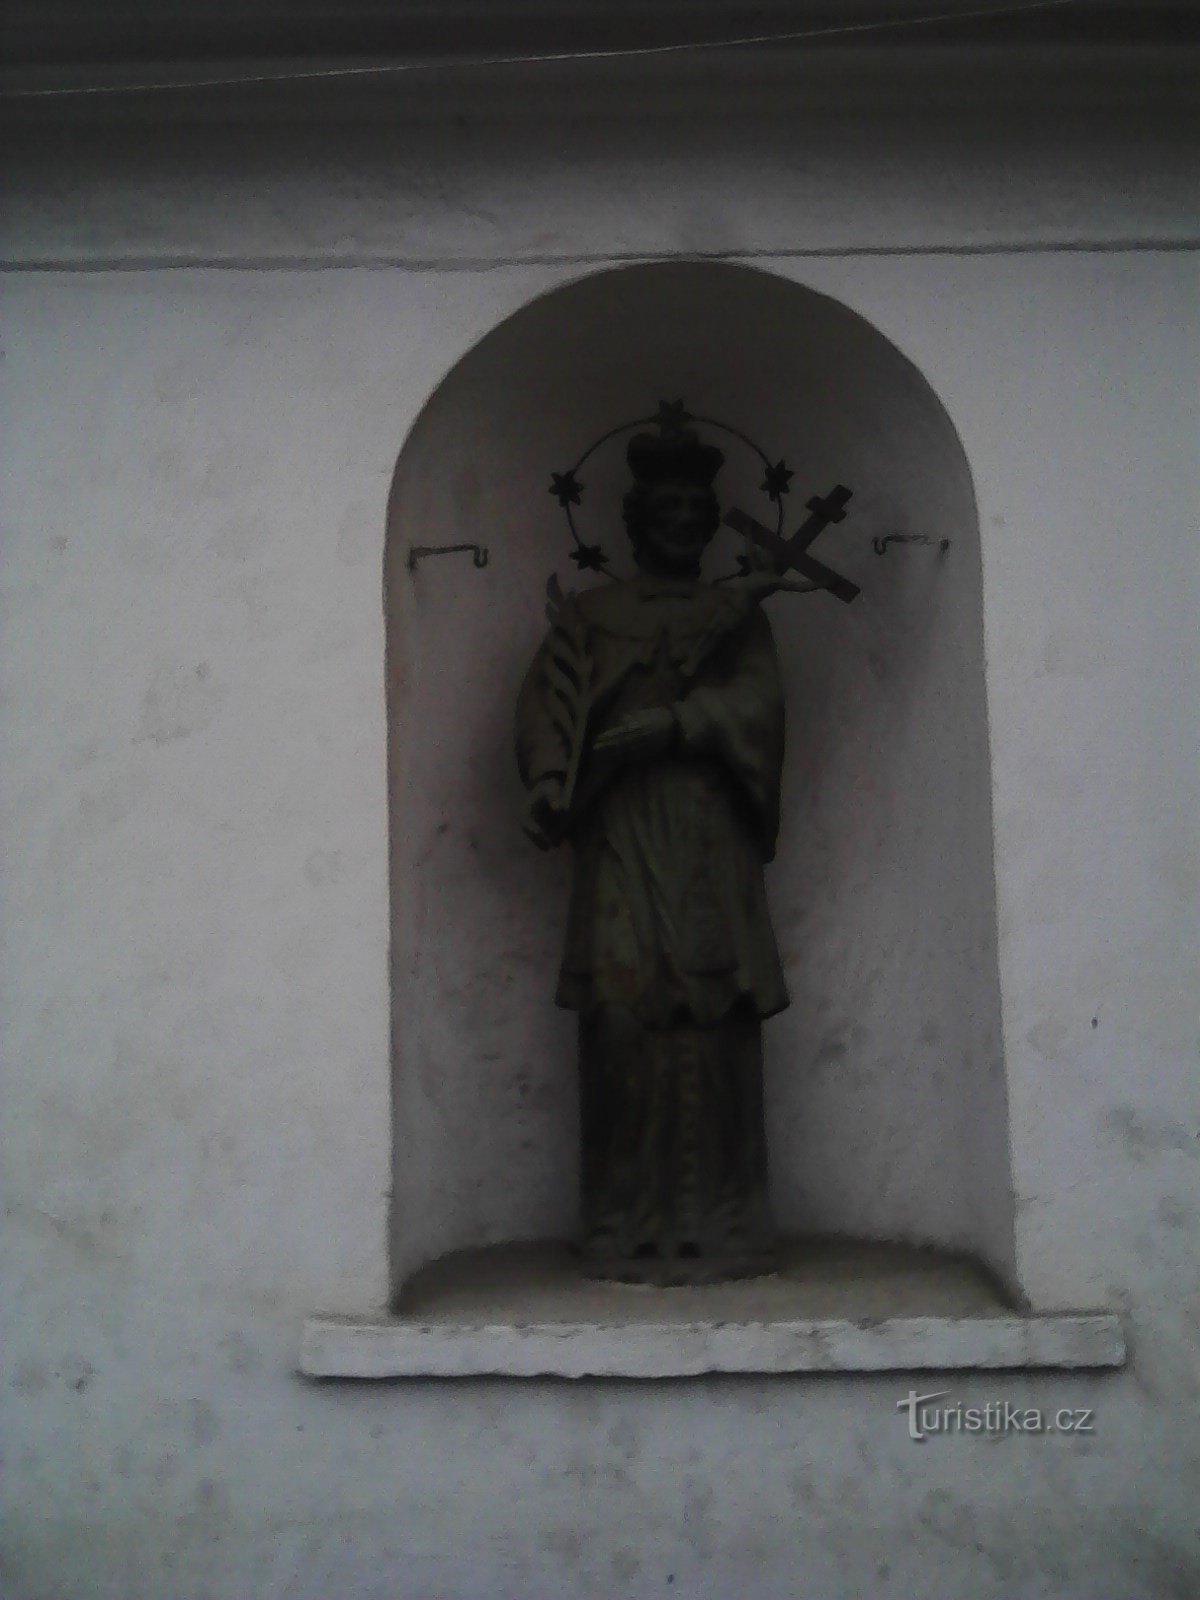 2. A statue of the saint on a house in Obratani.